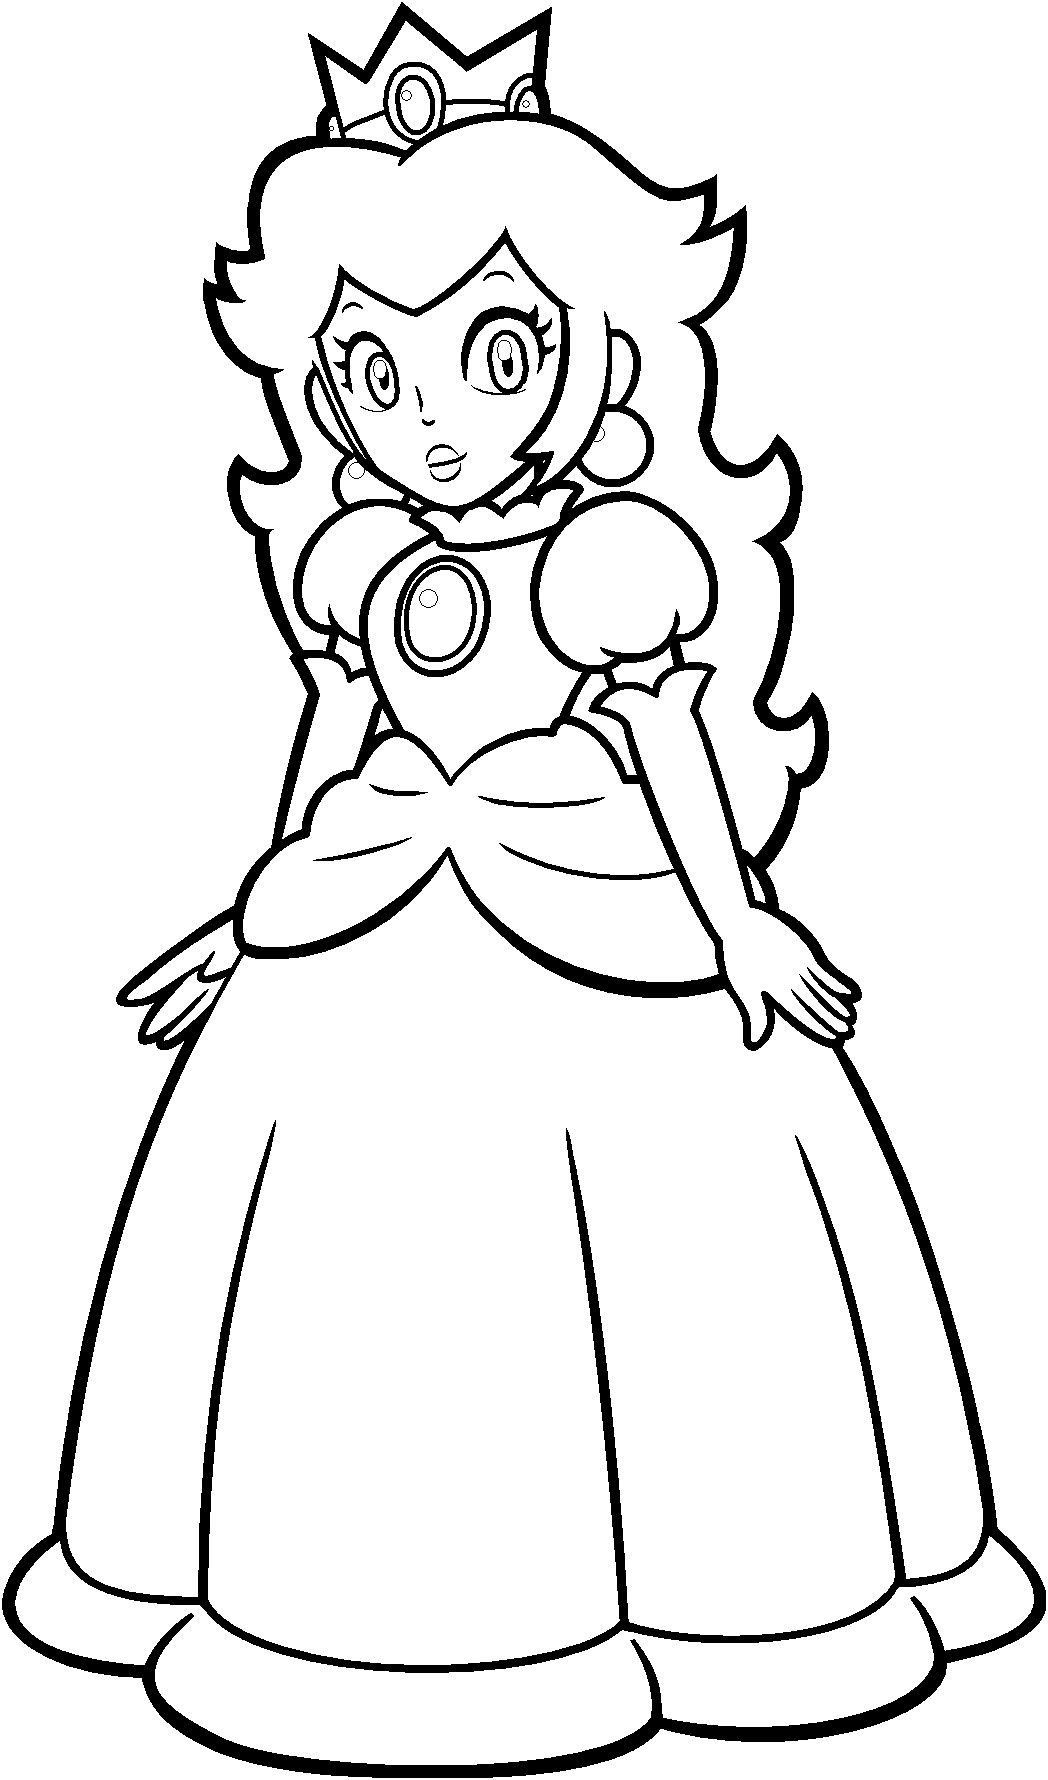 Rosalina Peach And Daisy Coloring Pages   Coloring Home